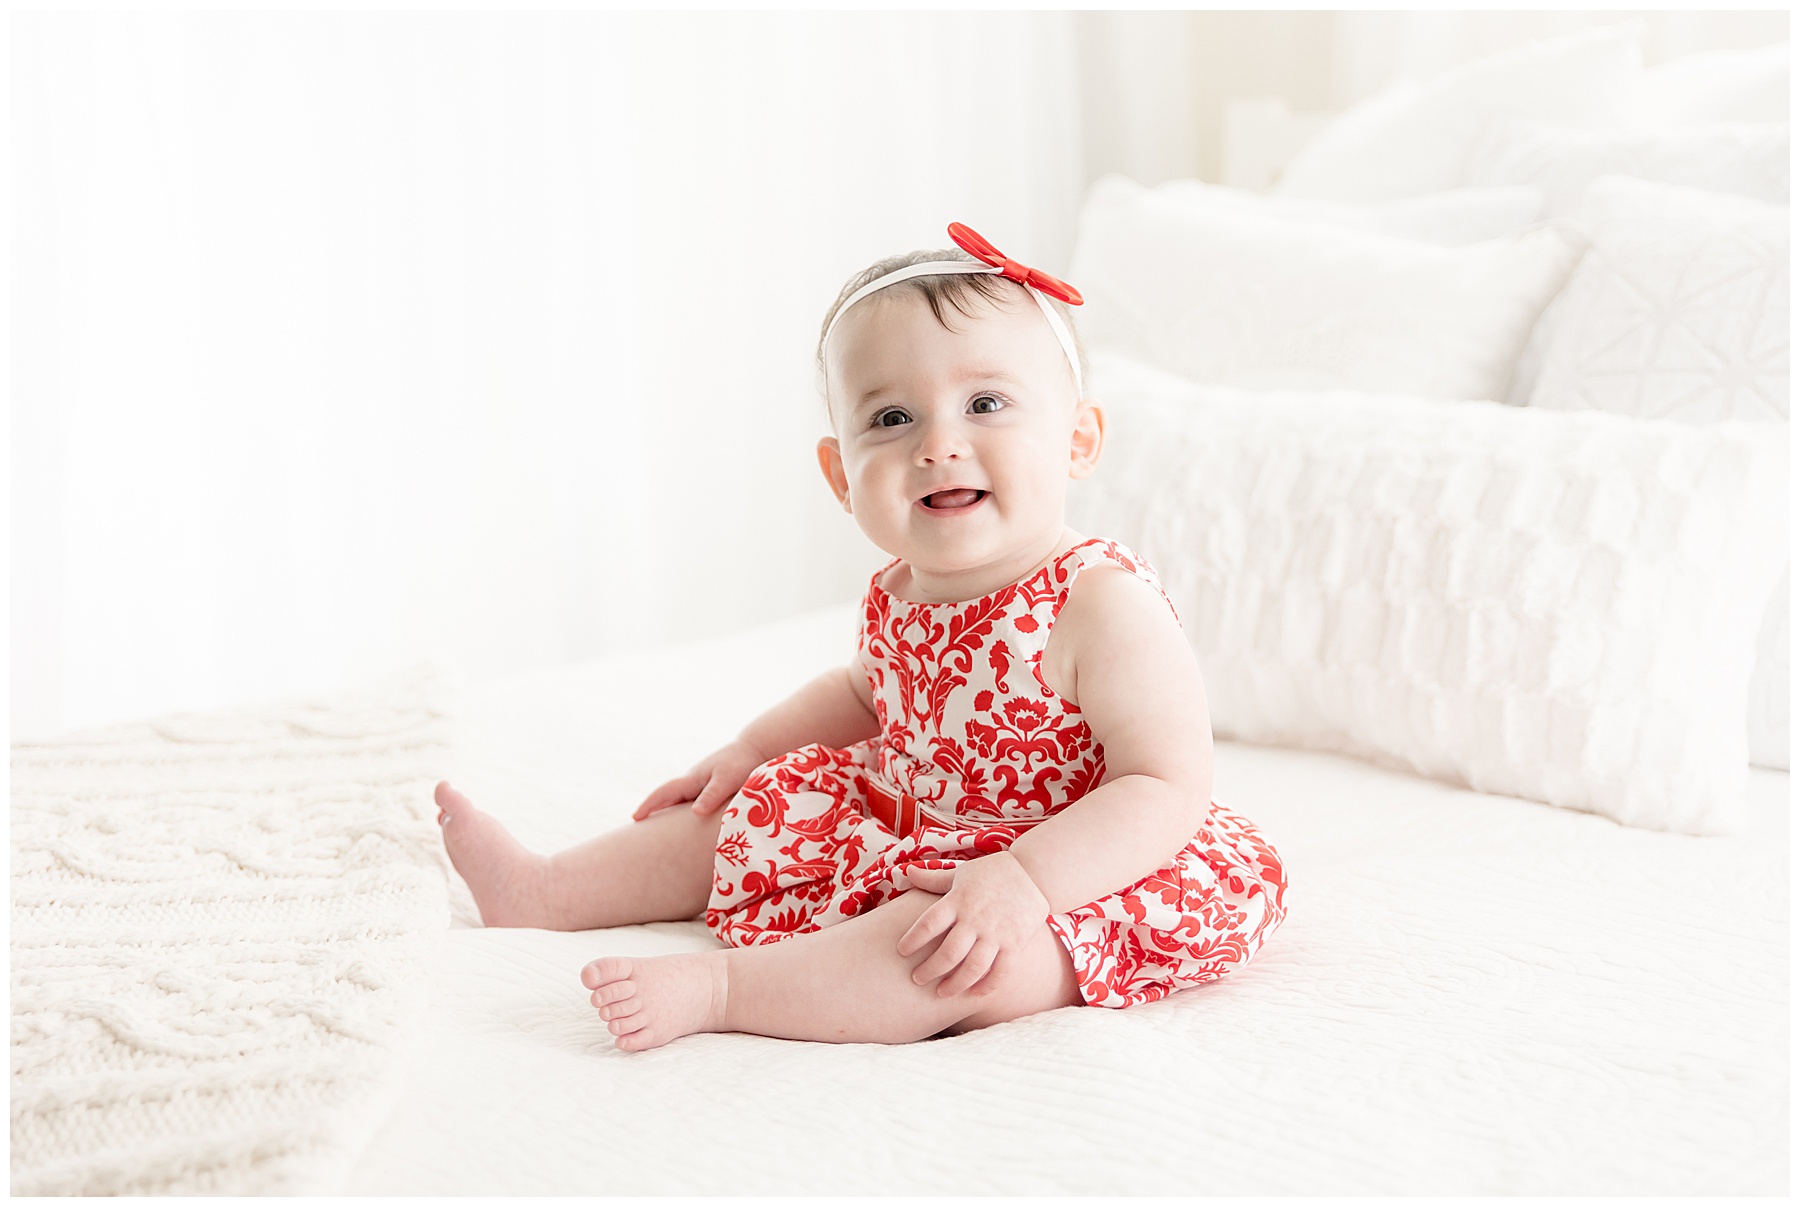 baby in red sits on white bed, watching baby grow